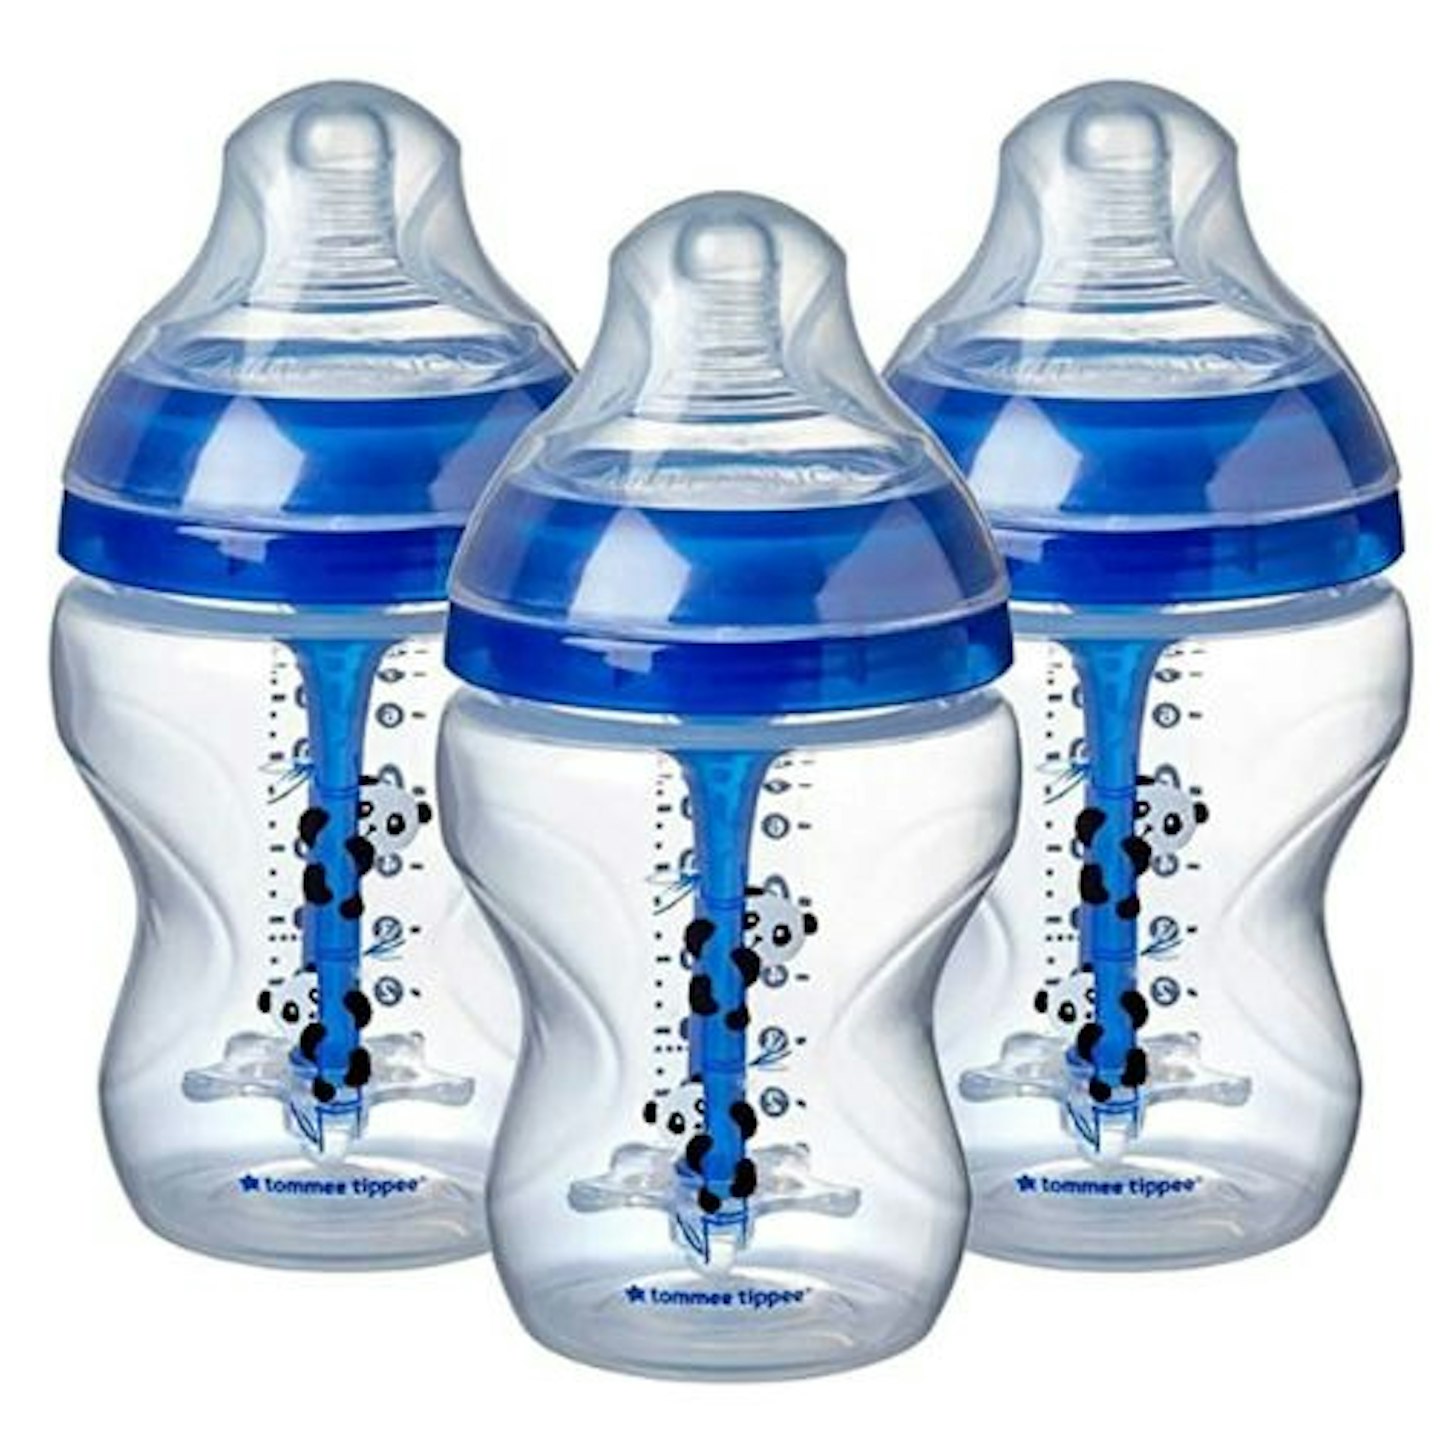 https://images.bauerhosting.com/affiliates/sites/12/2022/12/Tommee-Tippee-Advanced-Anti-Colic-Baby-Bottle.jpg?auto=format&w=1440&q=80